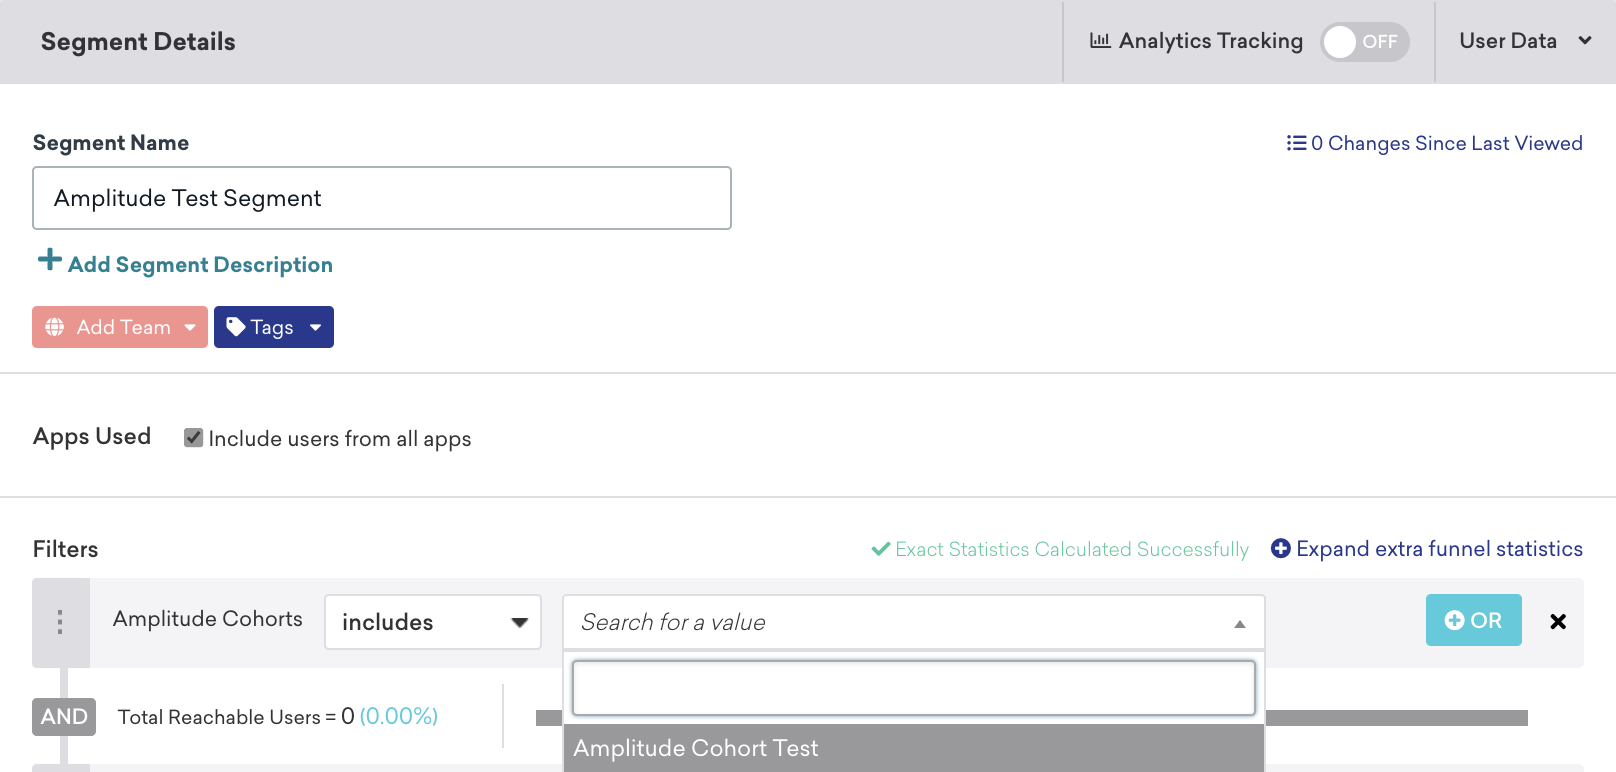 In the Braze segment builder, the filter "amplitude_cohorts" is set to "includes_value" and "Amplitude cohort test".